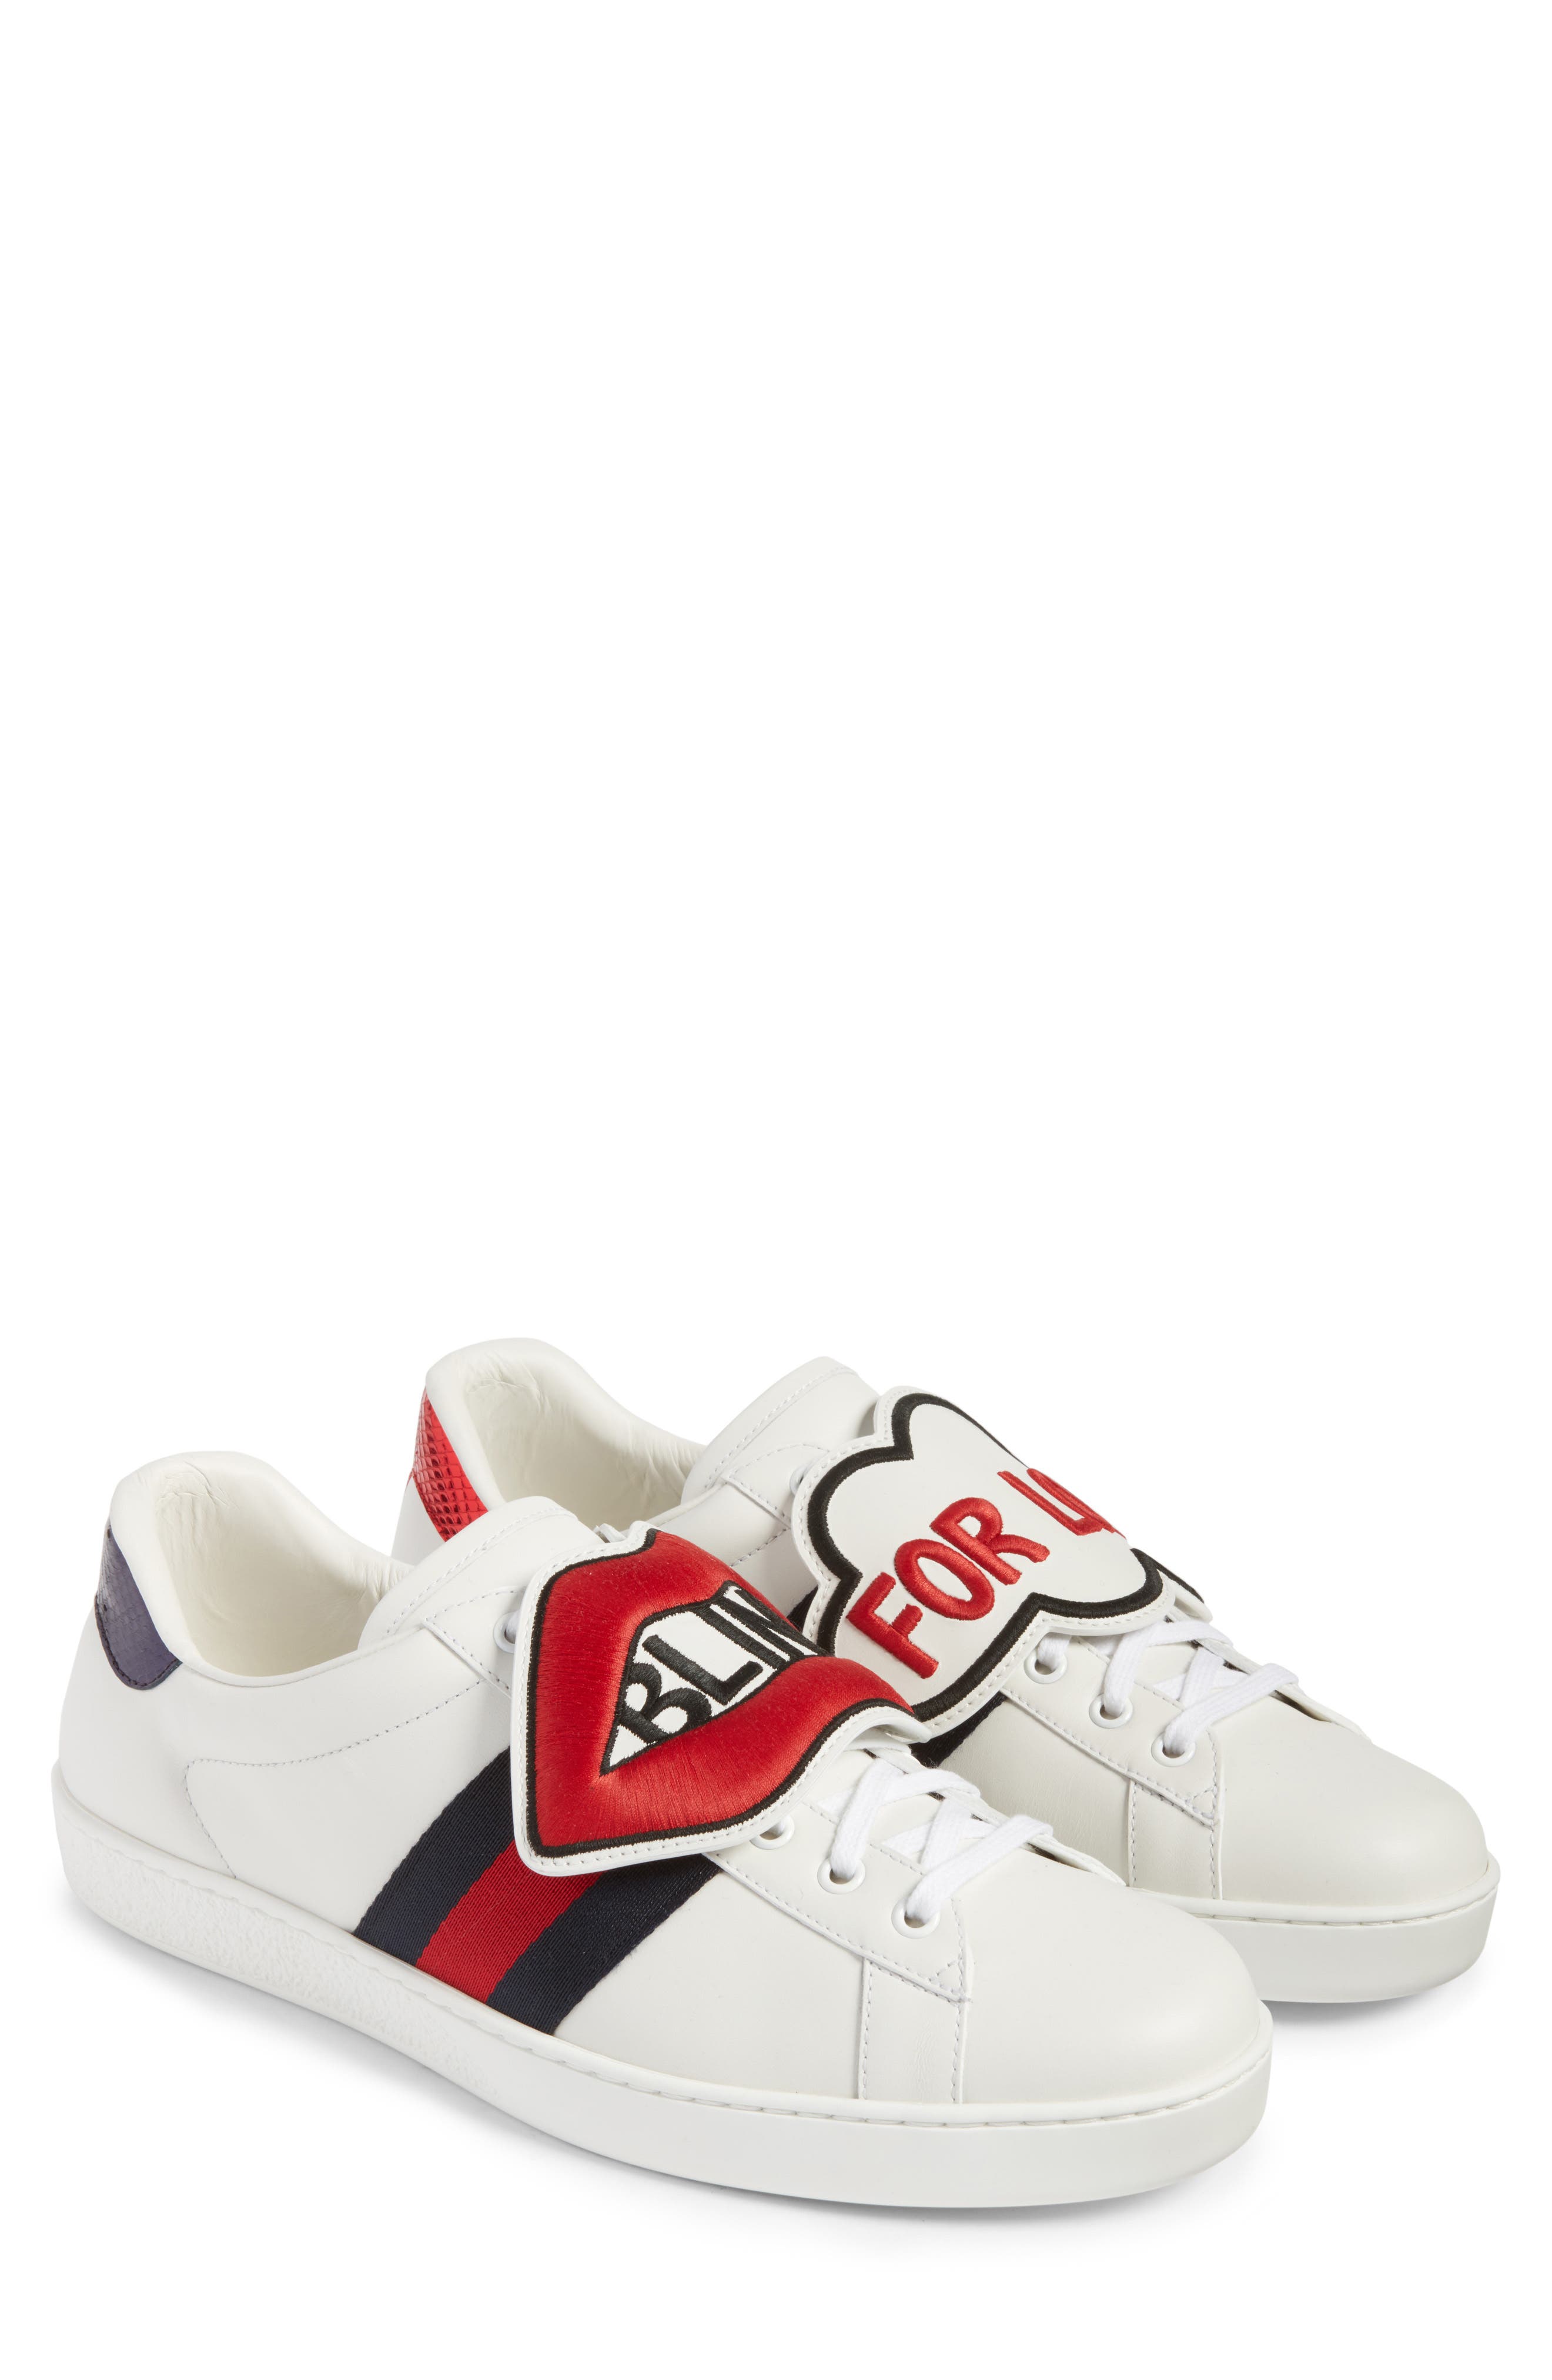 gucci ace patch sneakers